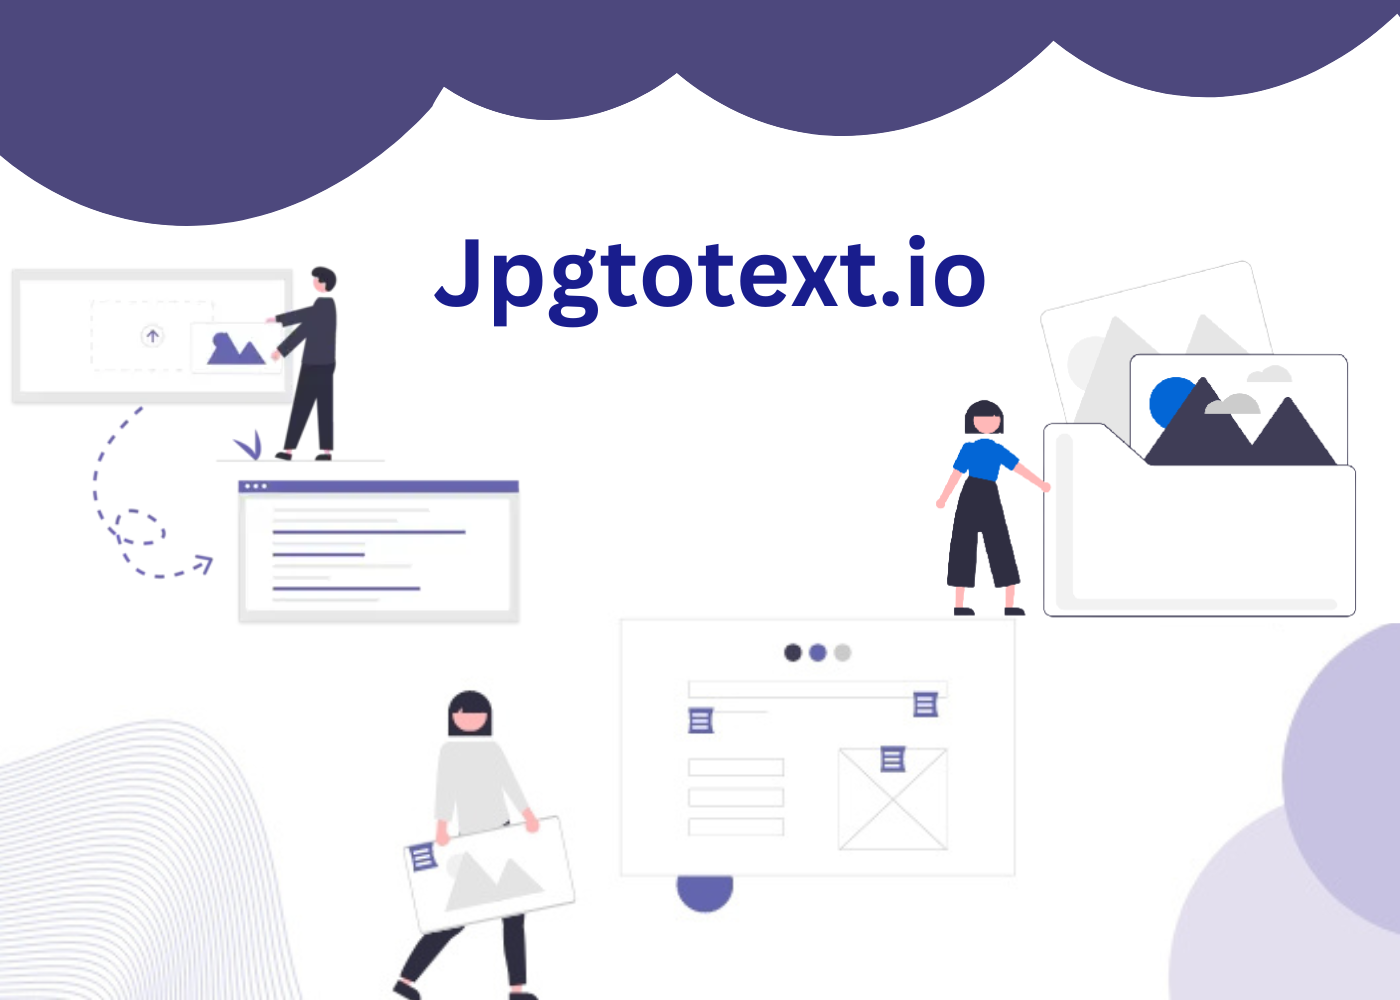 What Is The Jpgtotext.io JPG To TEXT Converter?